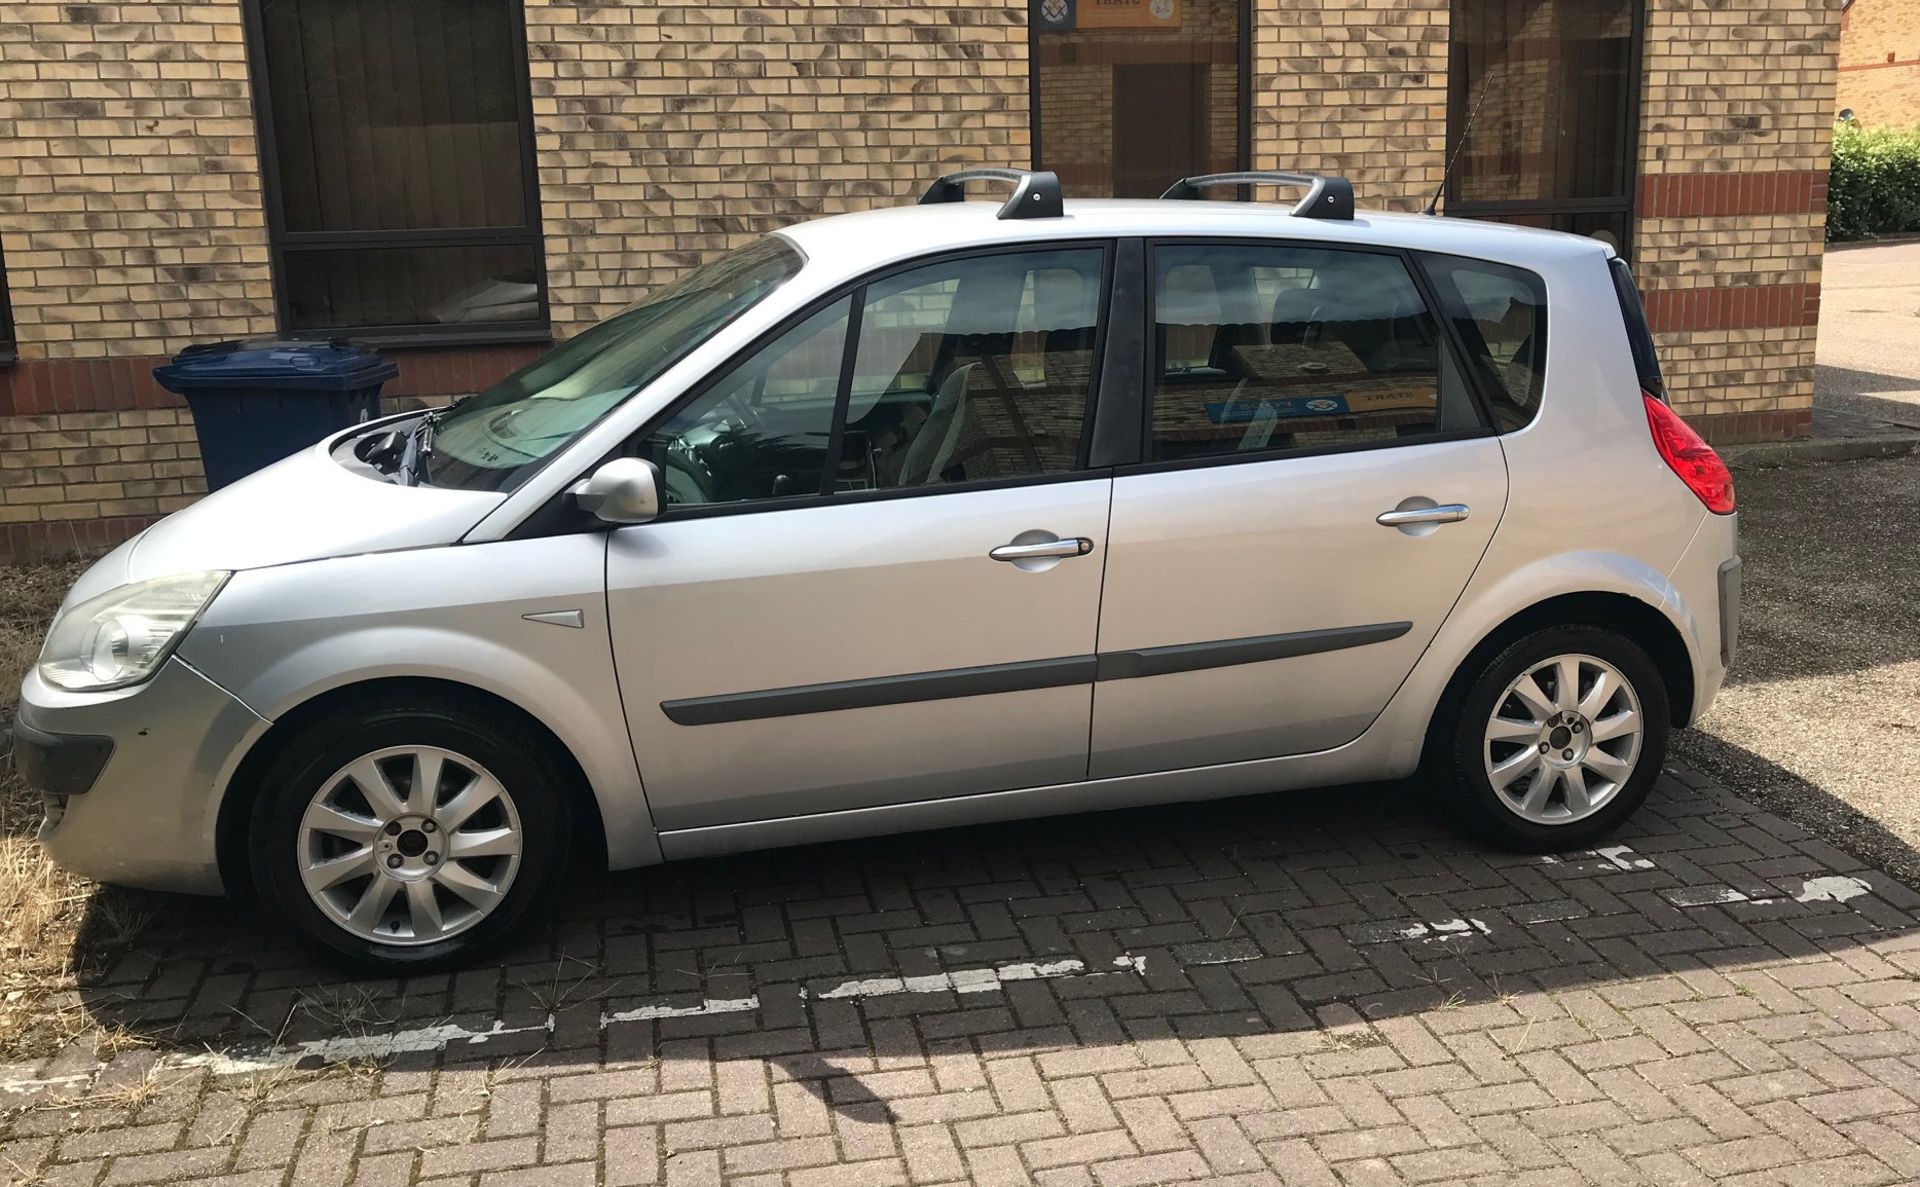 2006 Renault Scenic 1.6 VVT Dynamiq 5 Dr MPV - CL505 - NO VAT ON THE HAMMER - Location: Corby, Nort - Image 4 of 12